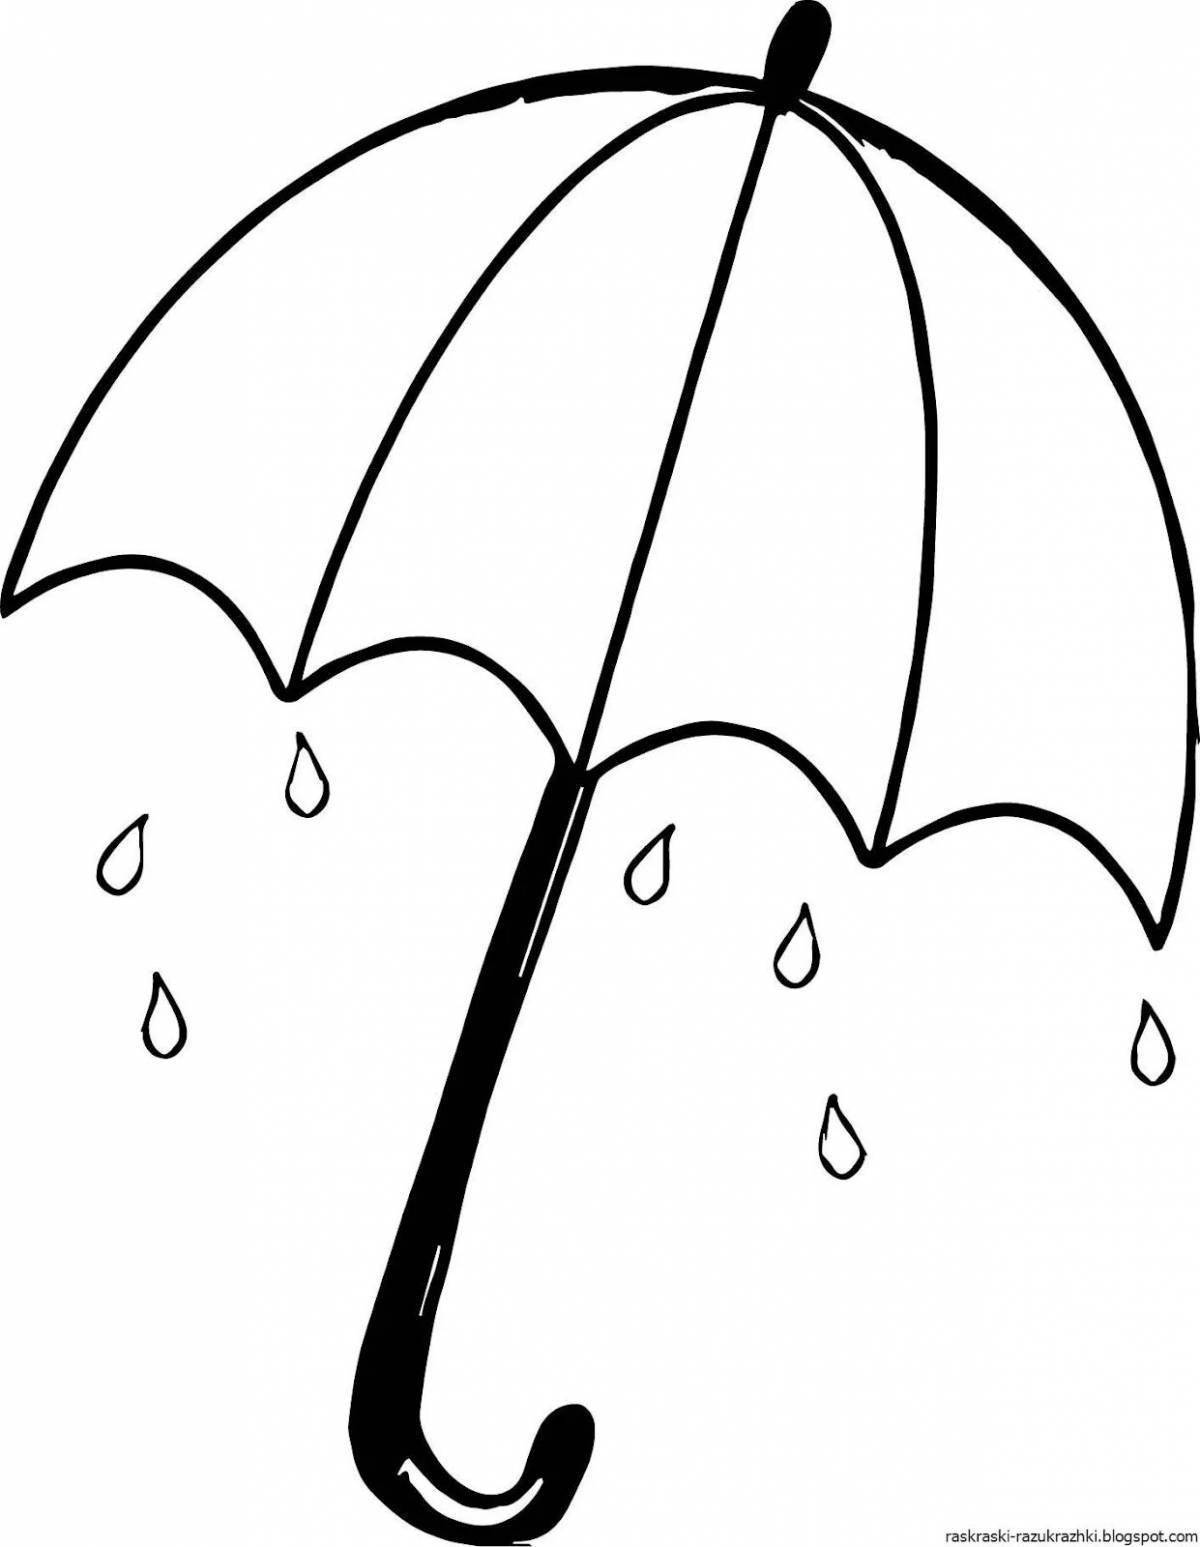 Coloring book cute umbrella for children 3-4 years old